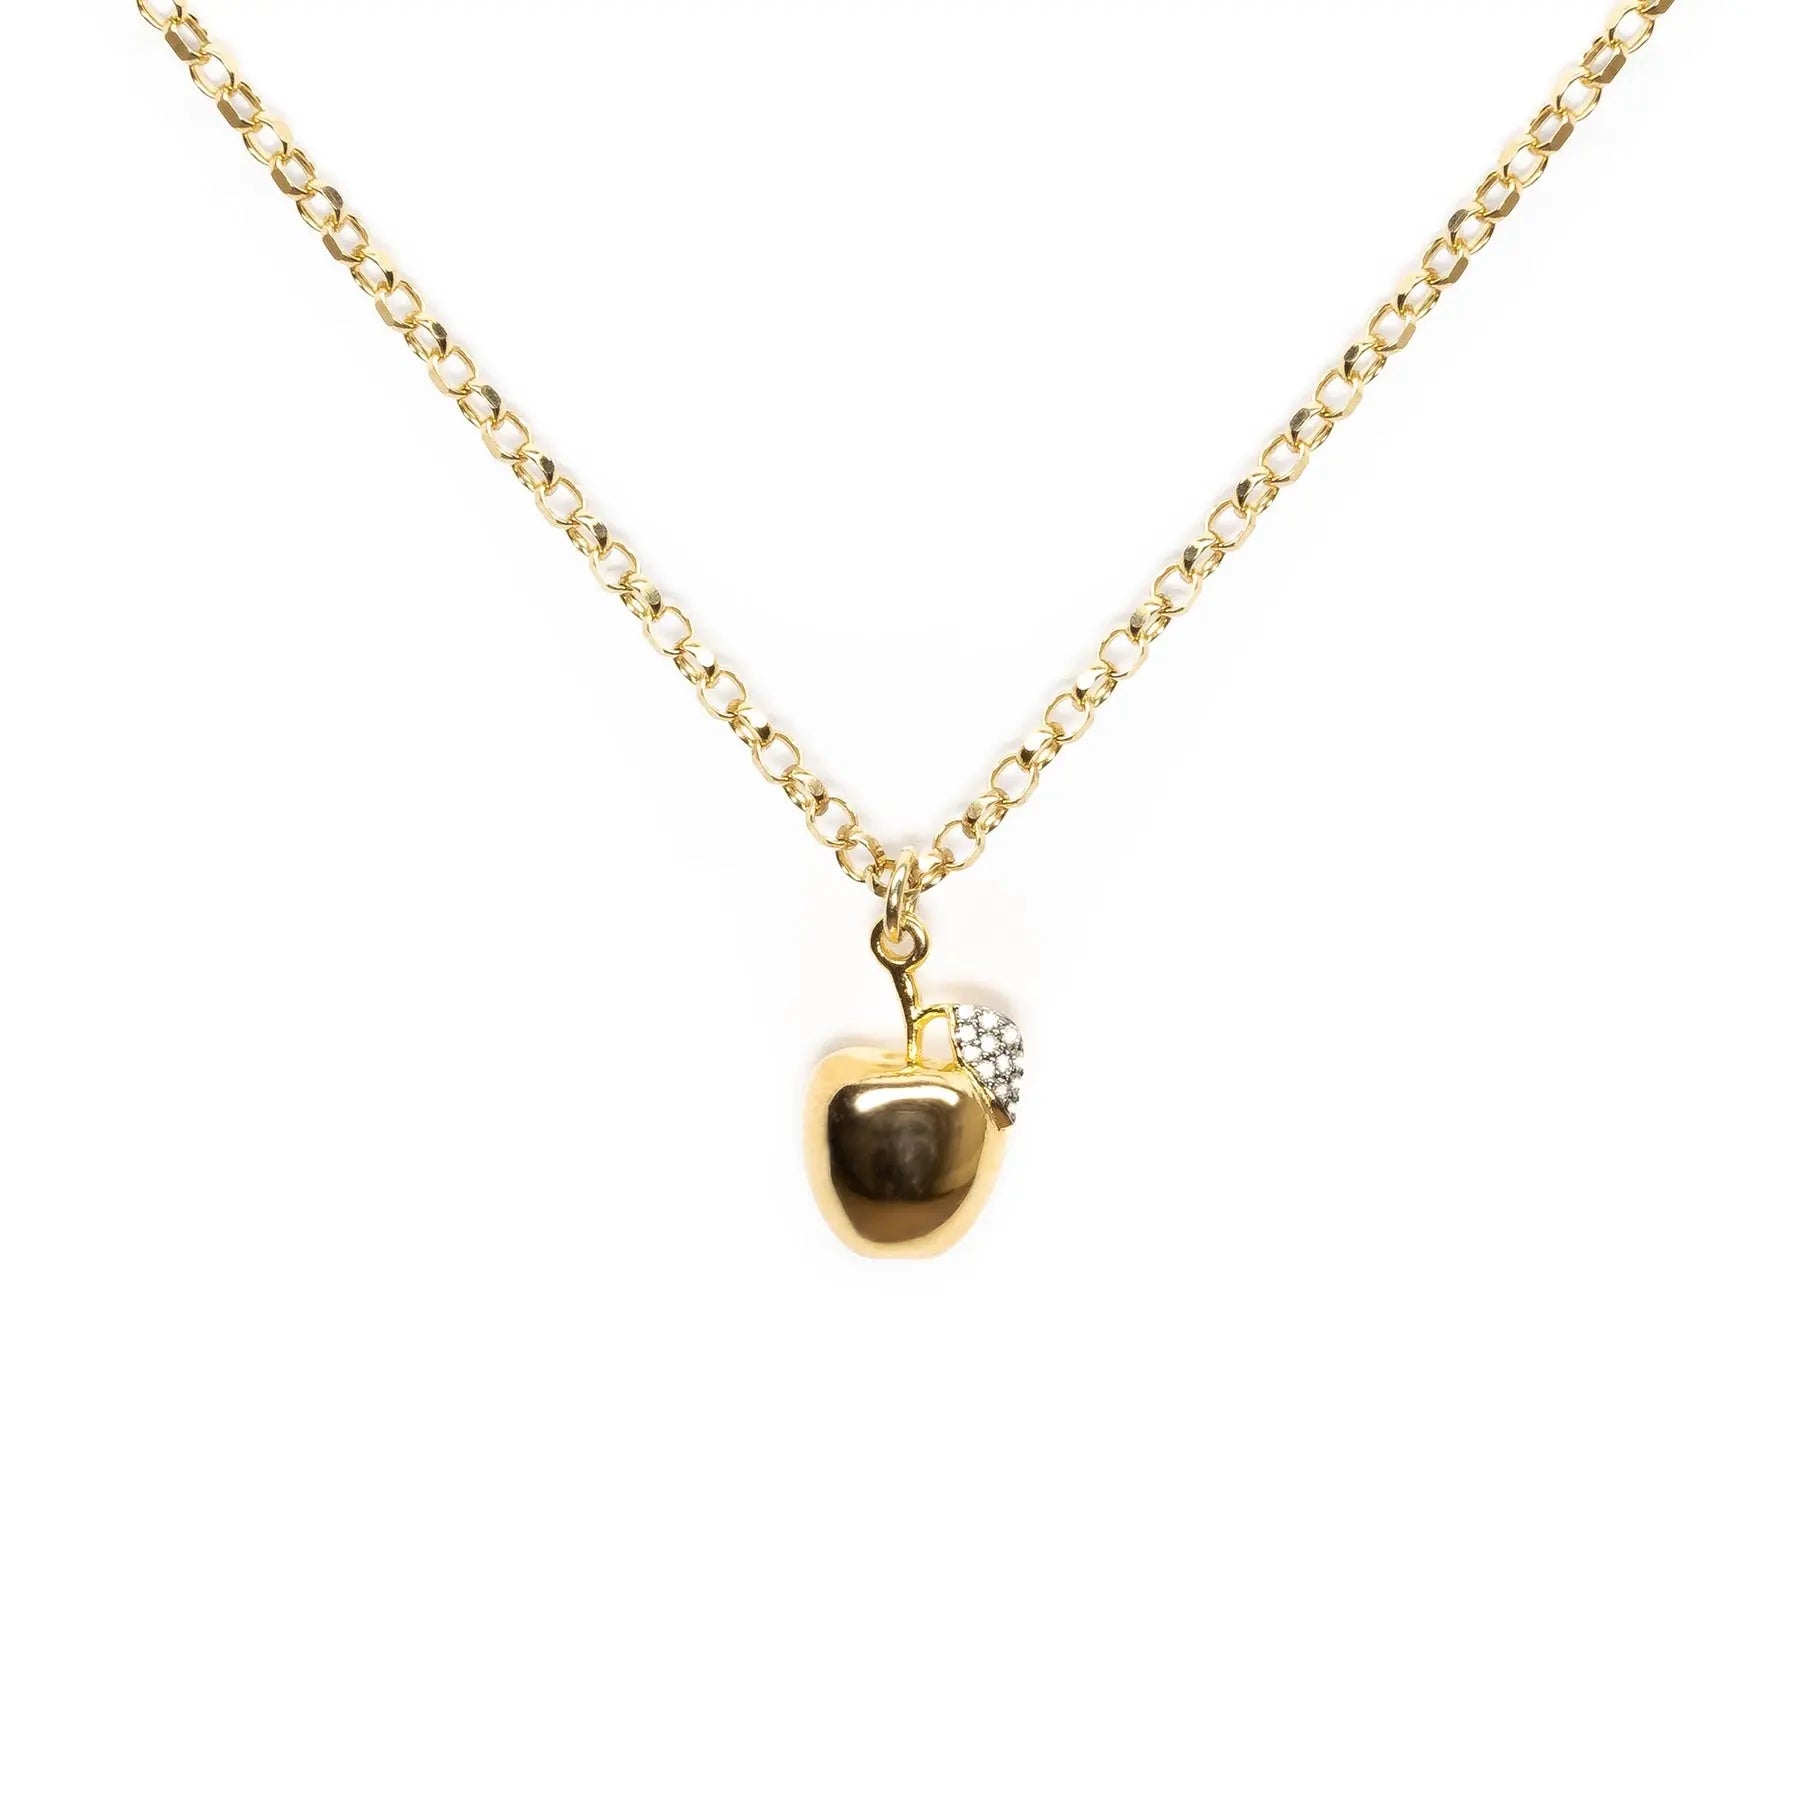 Diamond and Golden Apple Necklace